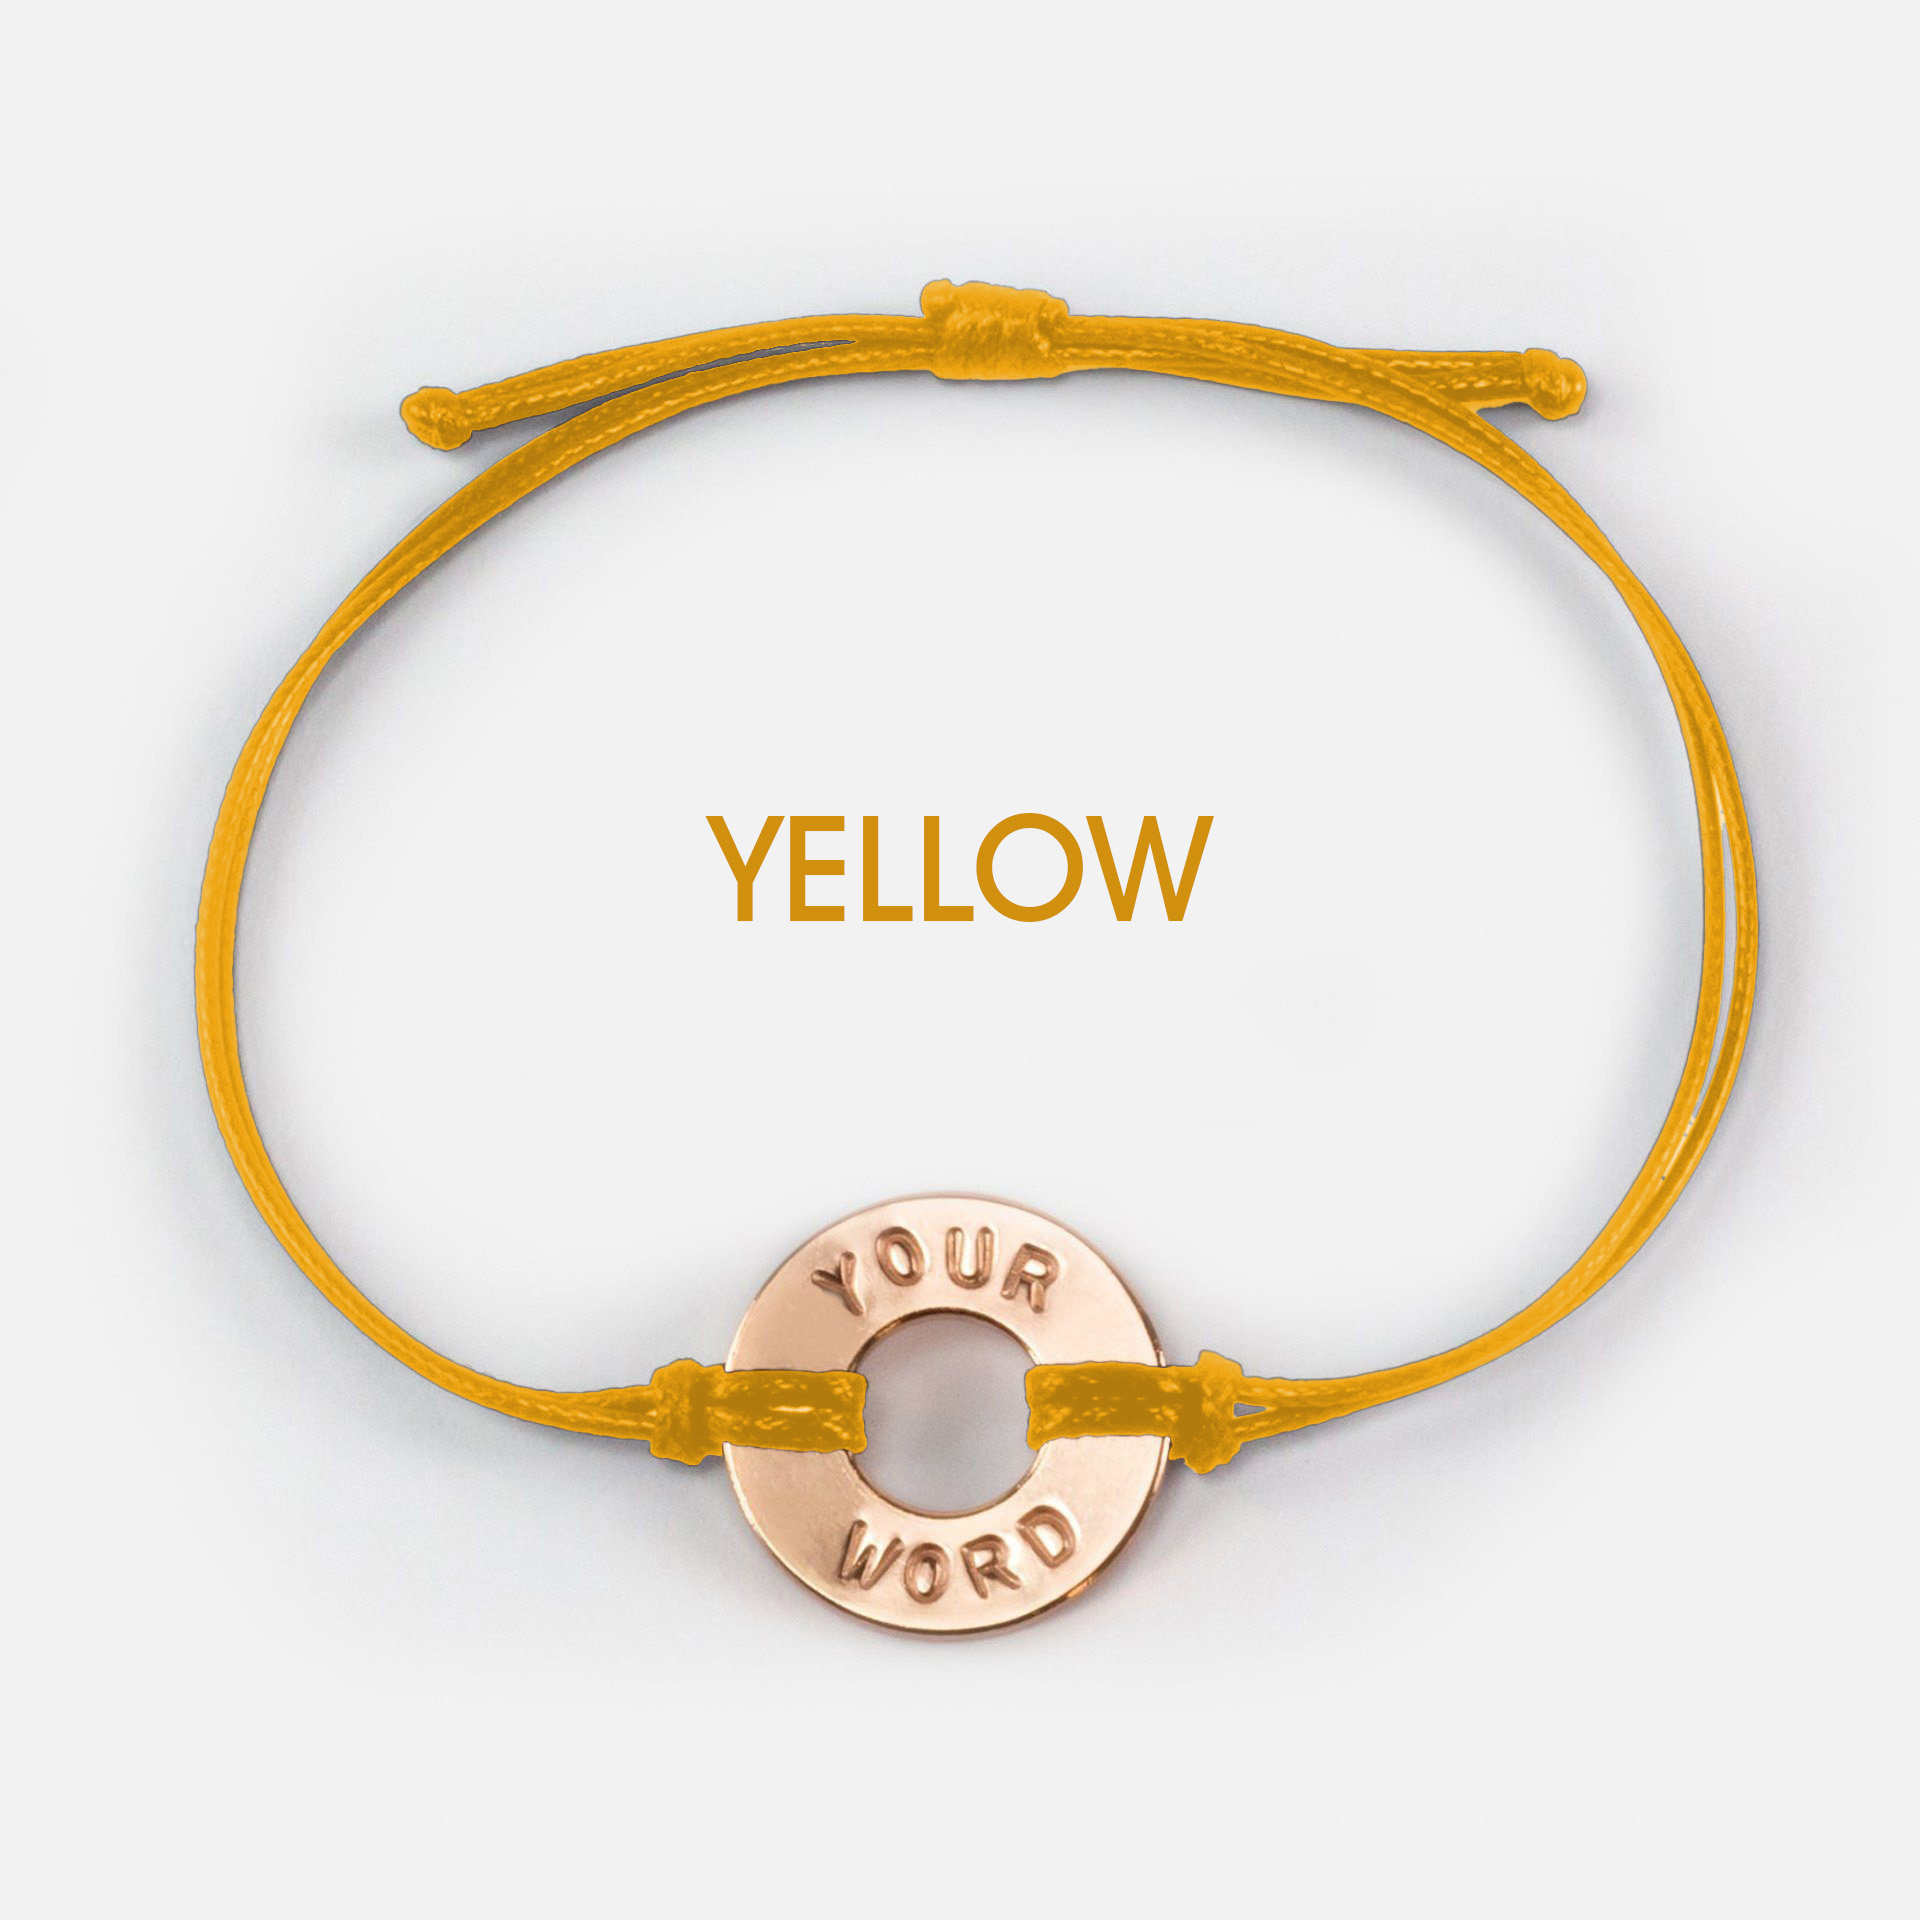 Customize MyIntent Bracelet  Engraved With Your Personal Intent Word  One  Golden Thread